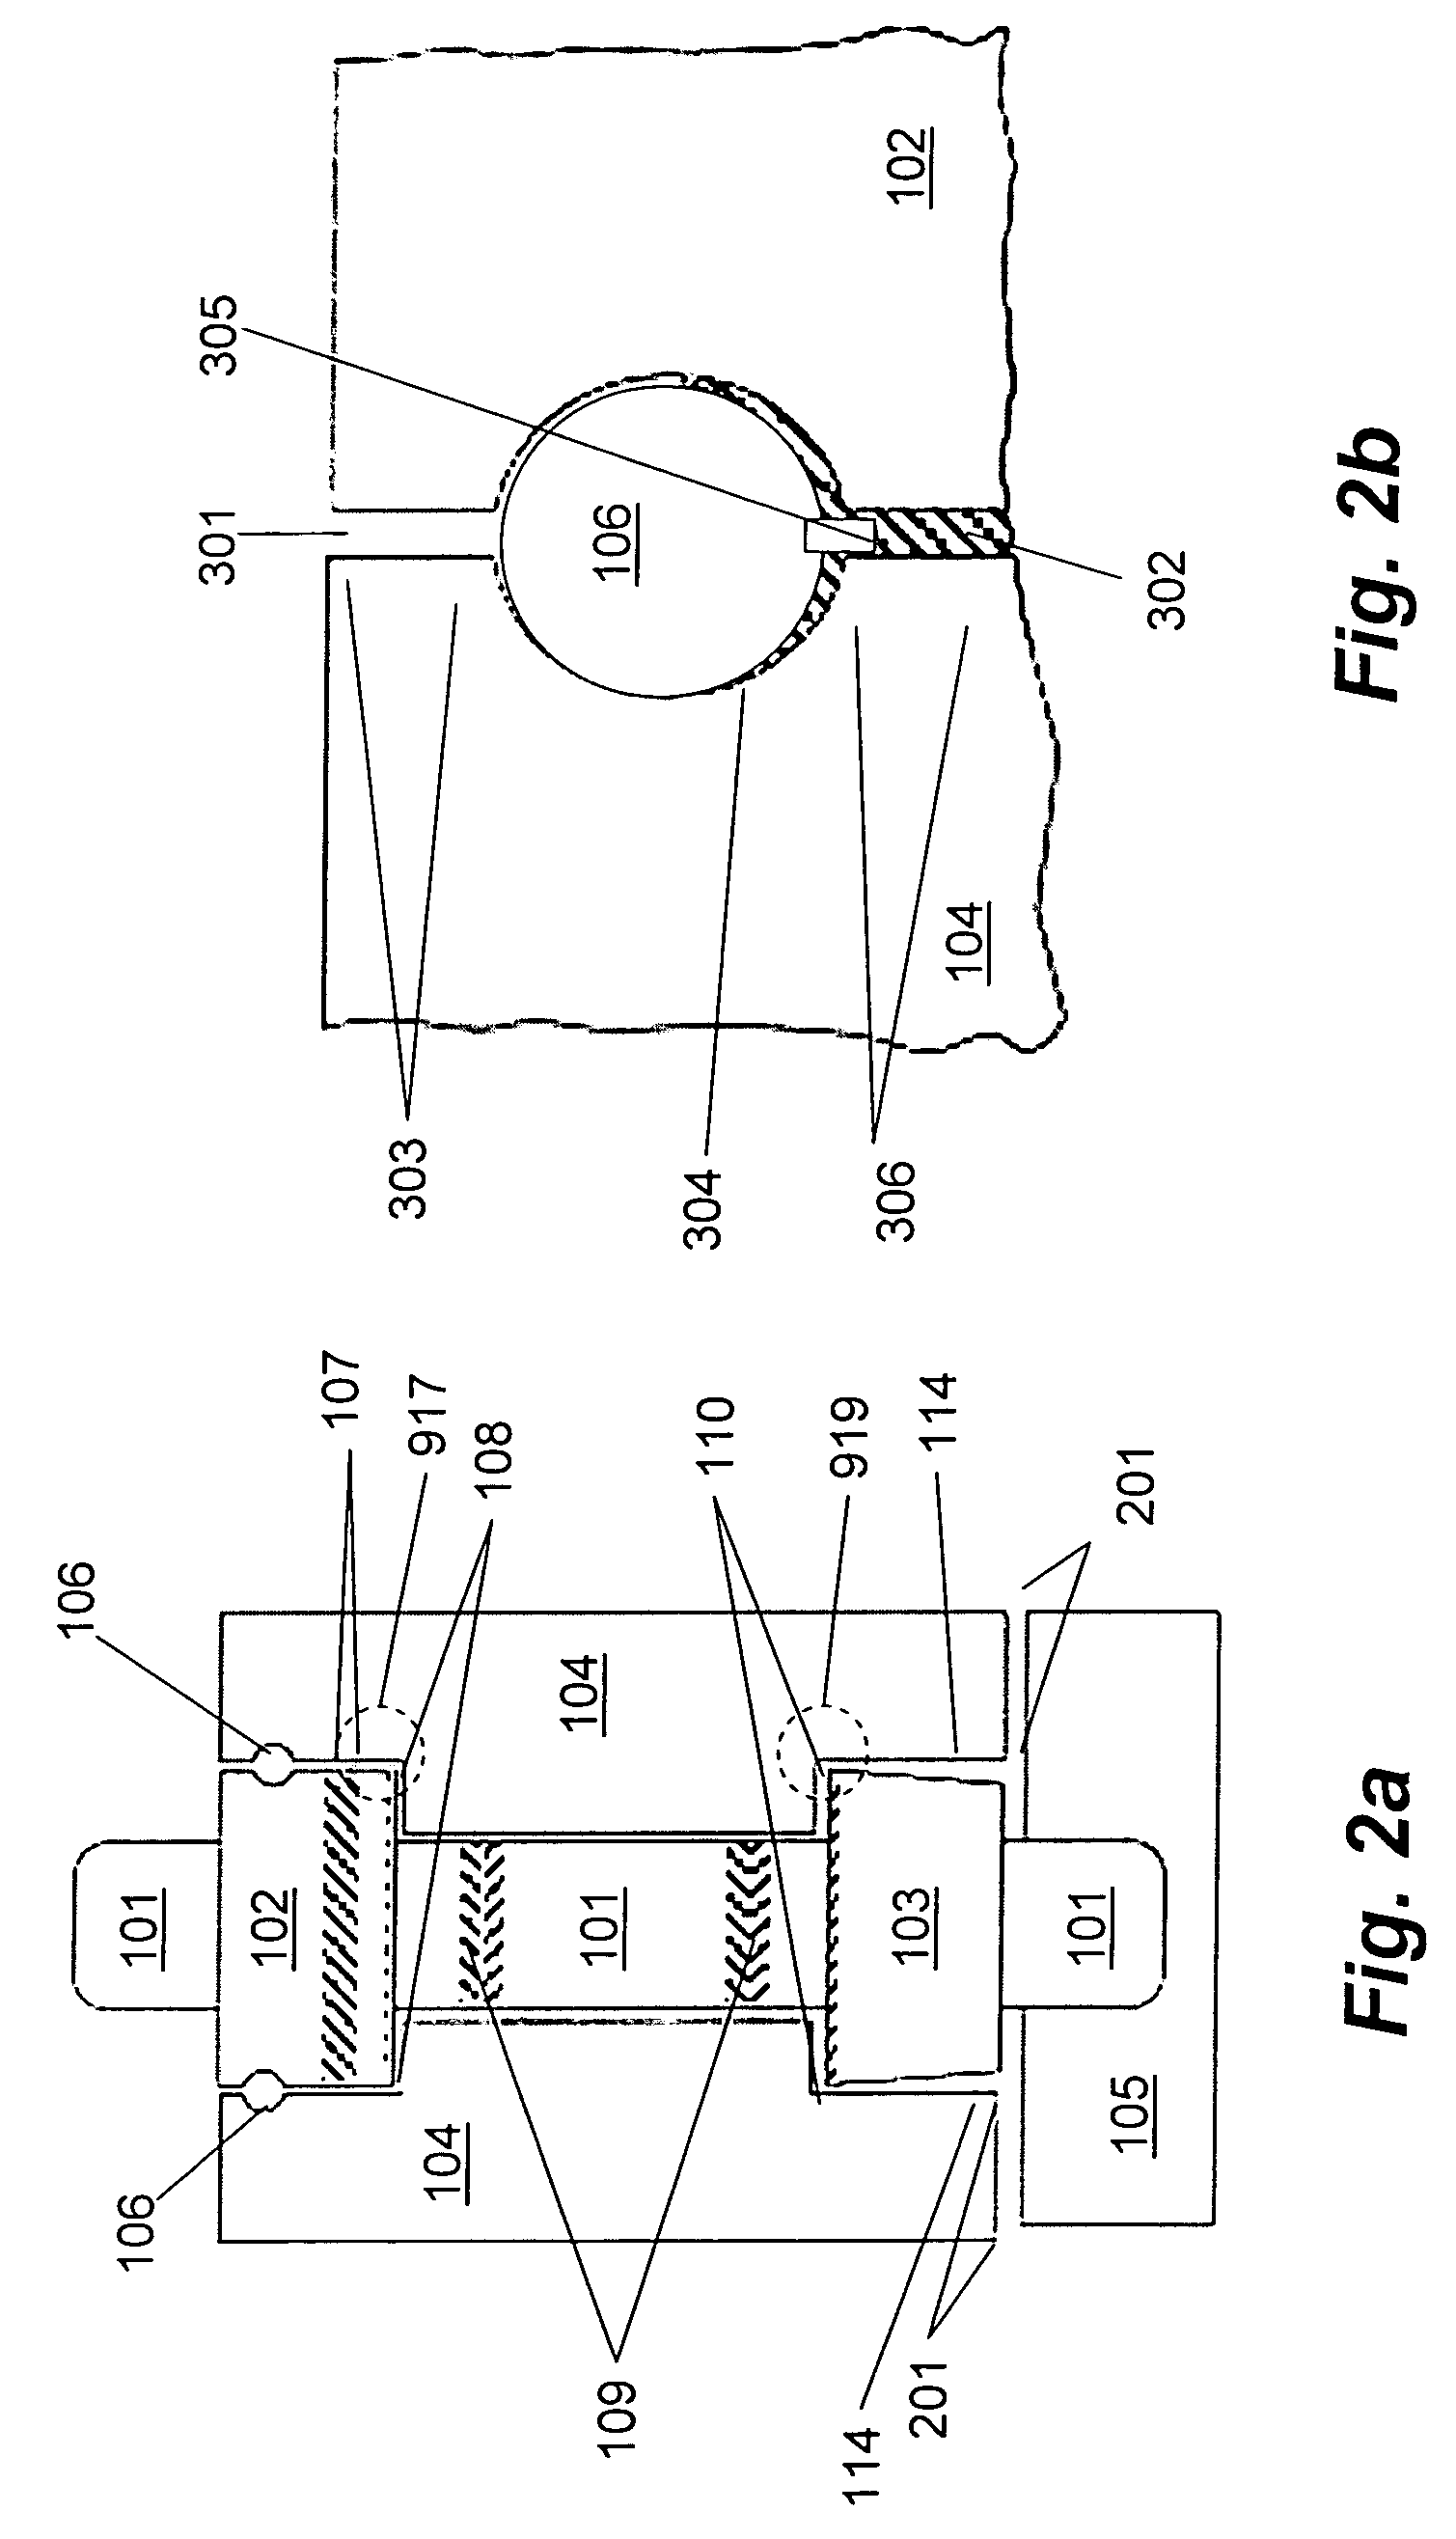 Hub and spindle assembly having asymmetrical seals for a disc drive memory system